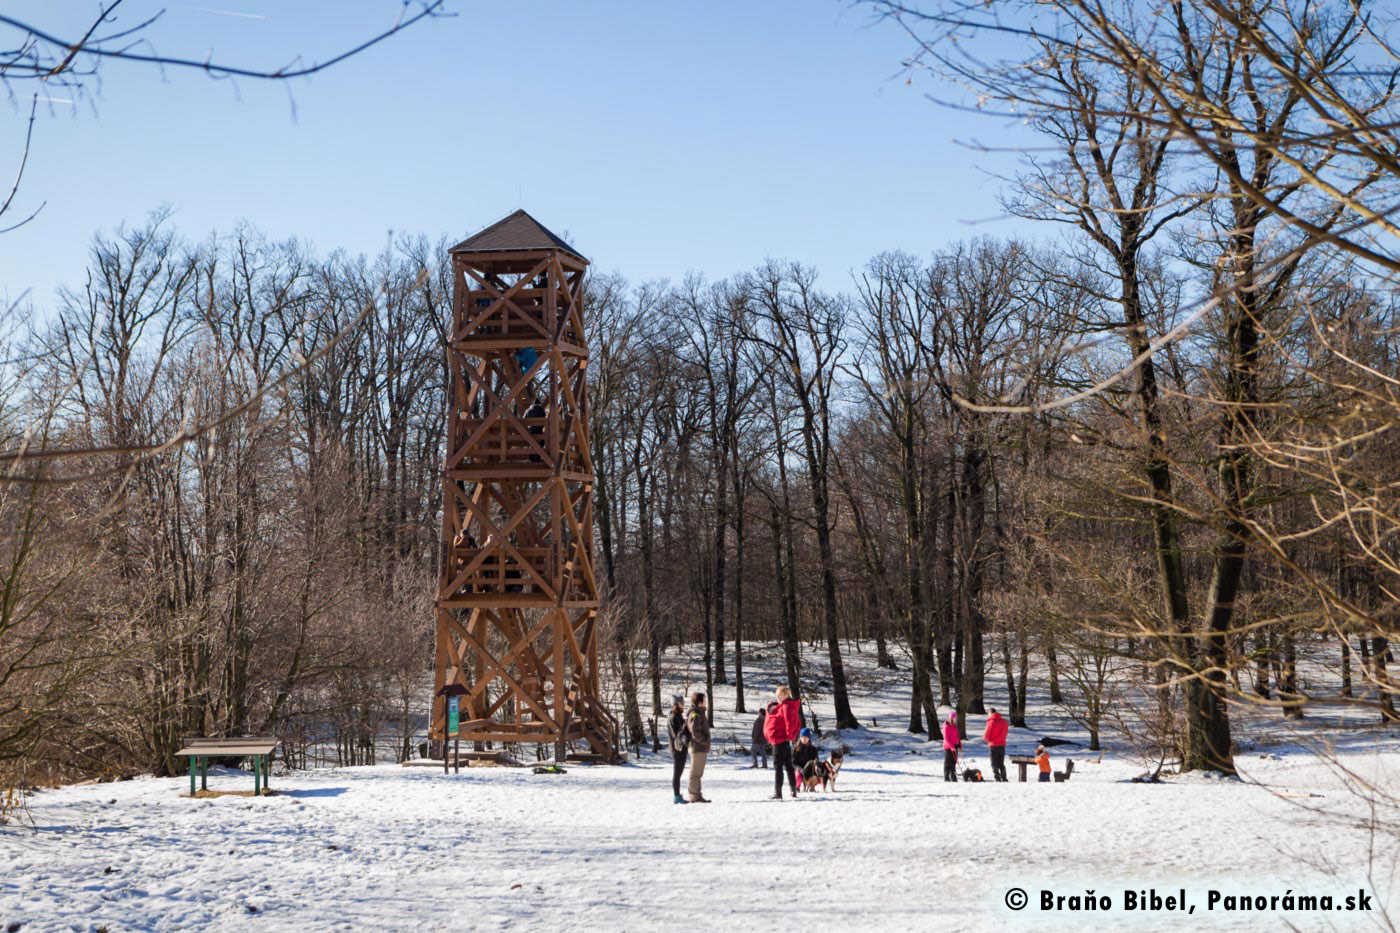 Wooden sightseeing tower in Bratislava forests in Winter